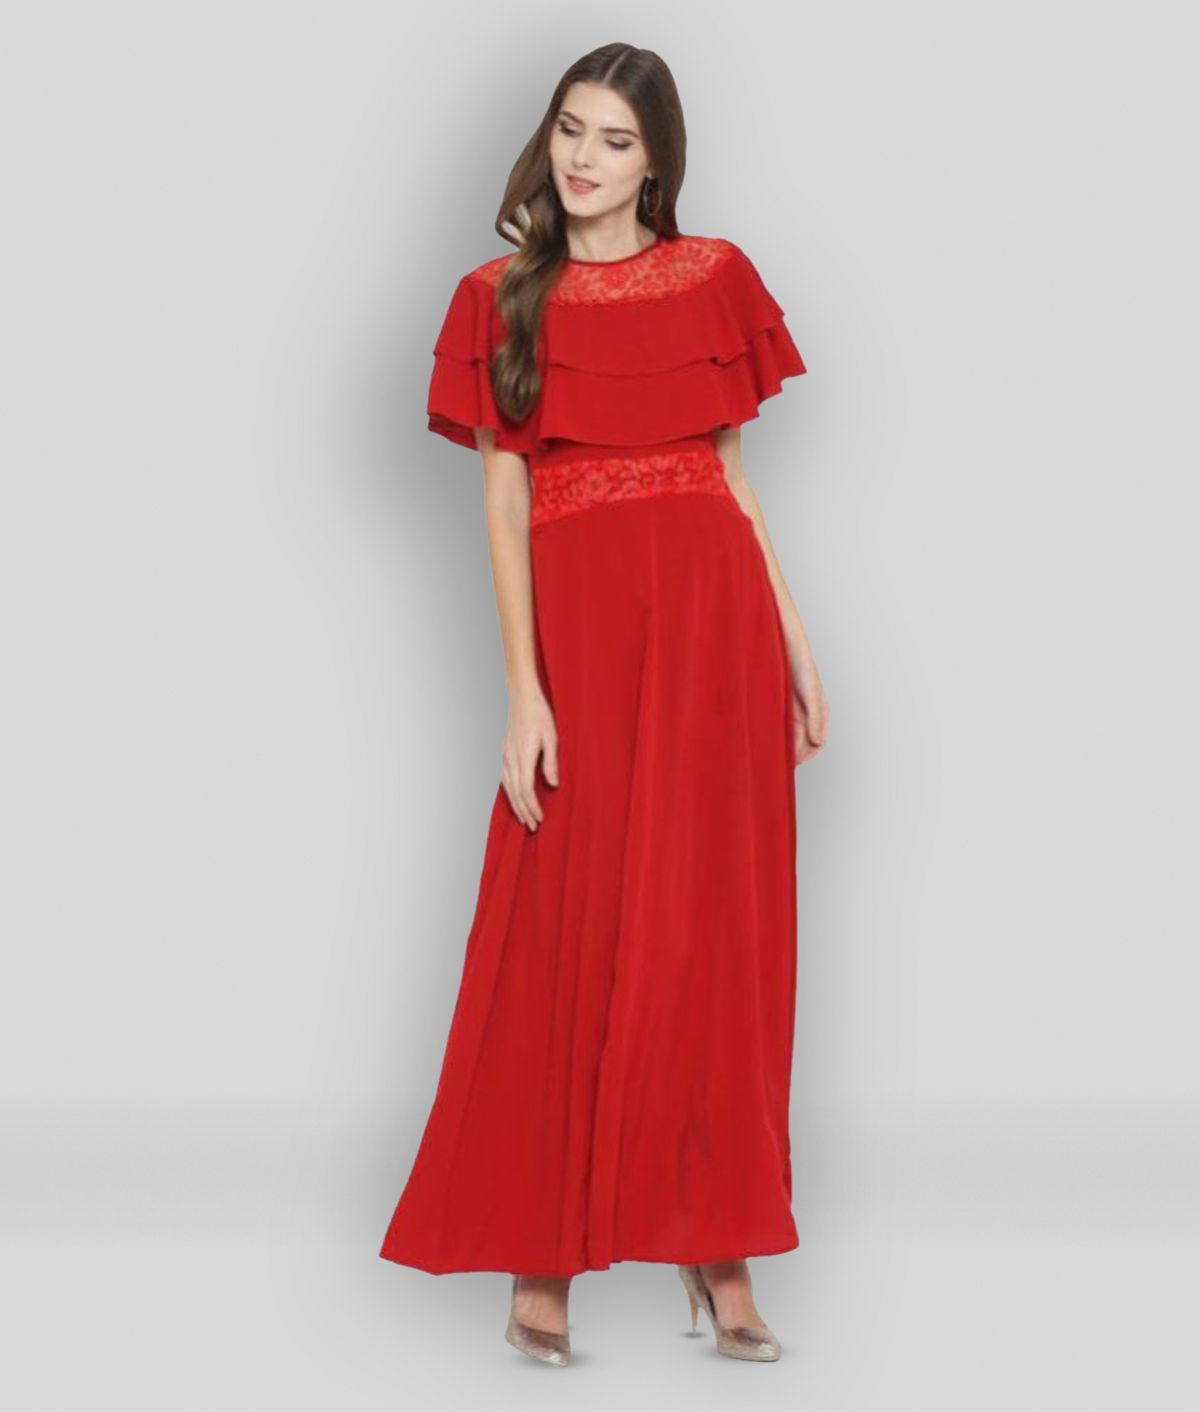 Cottinfab - Red Polyester Women's A-line Dress ( Pack of 1 )